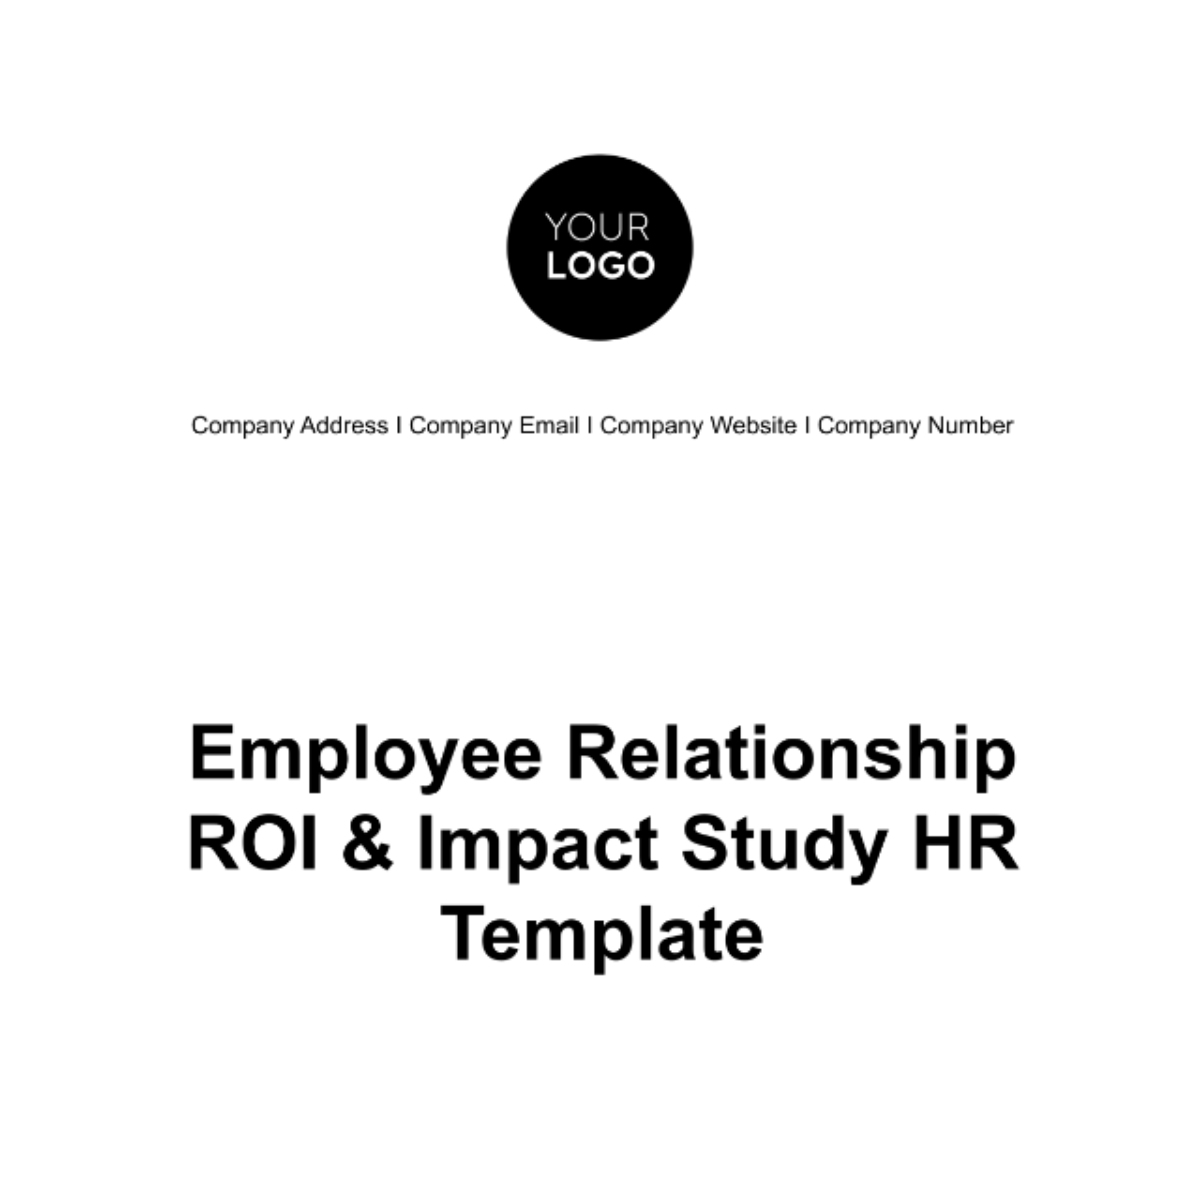 Free Employee Relationship ROI & Impact Study HR Template